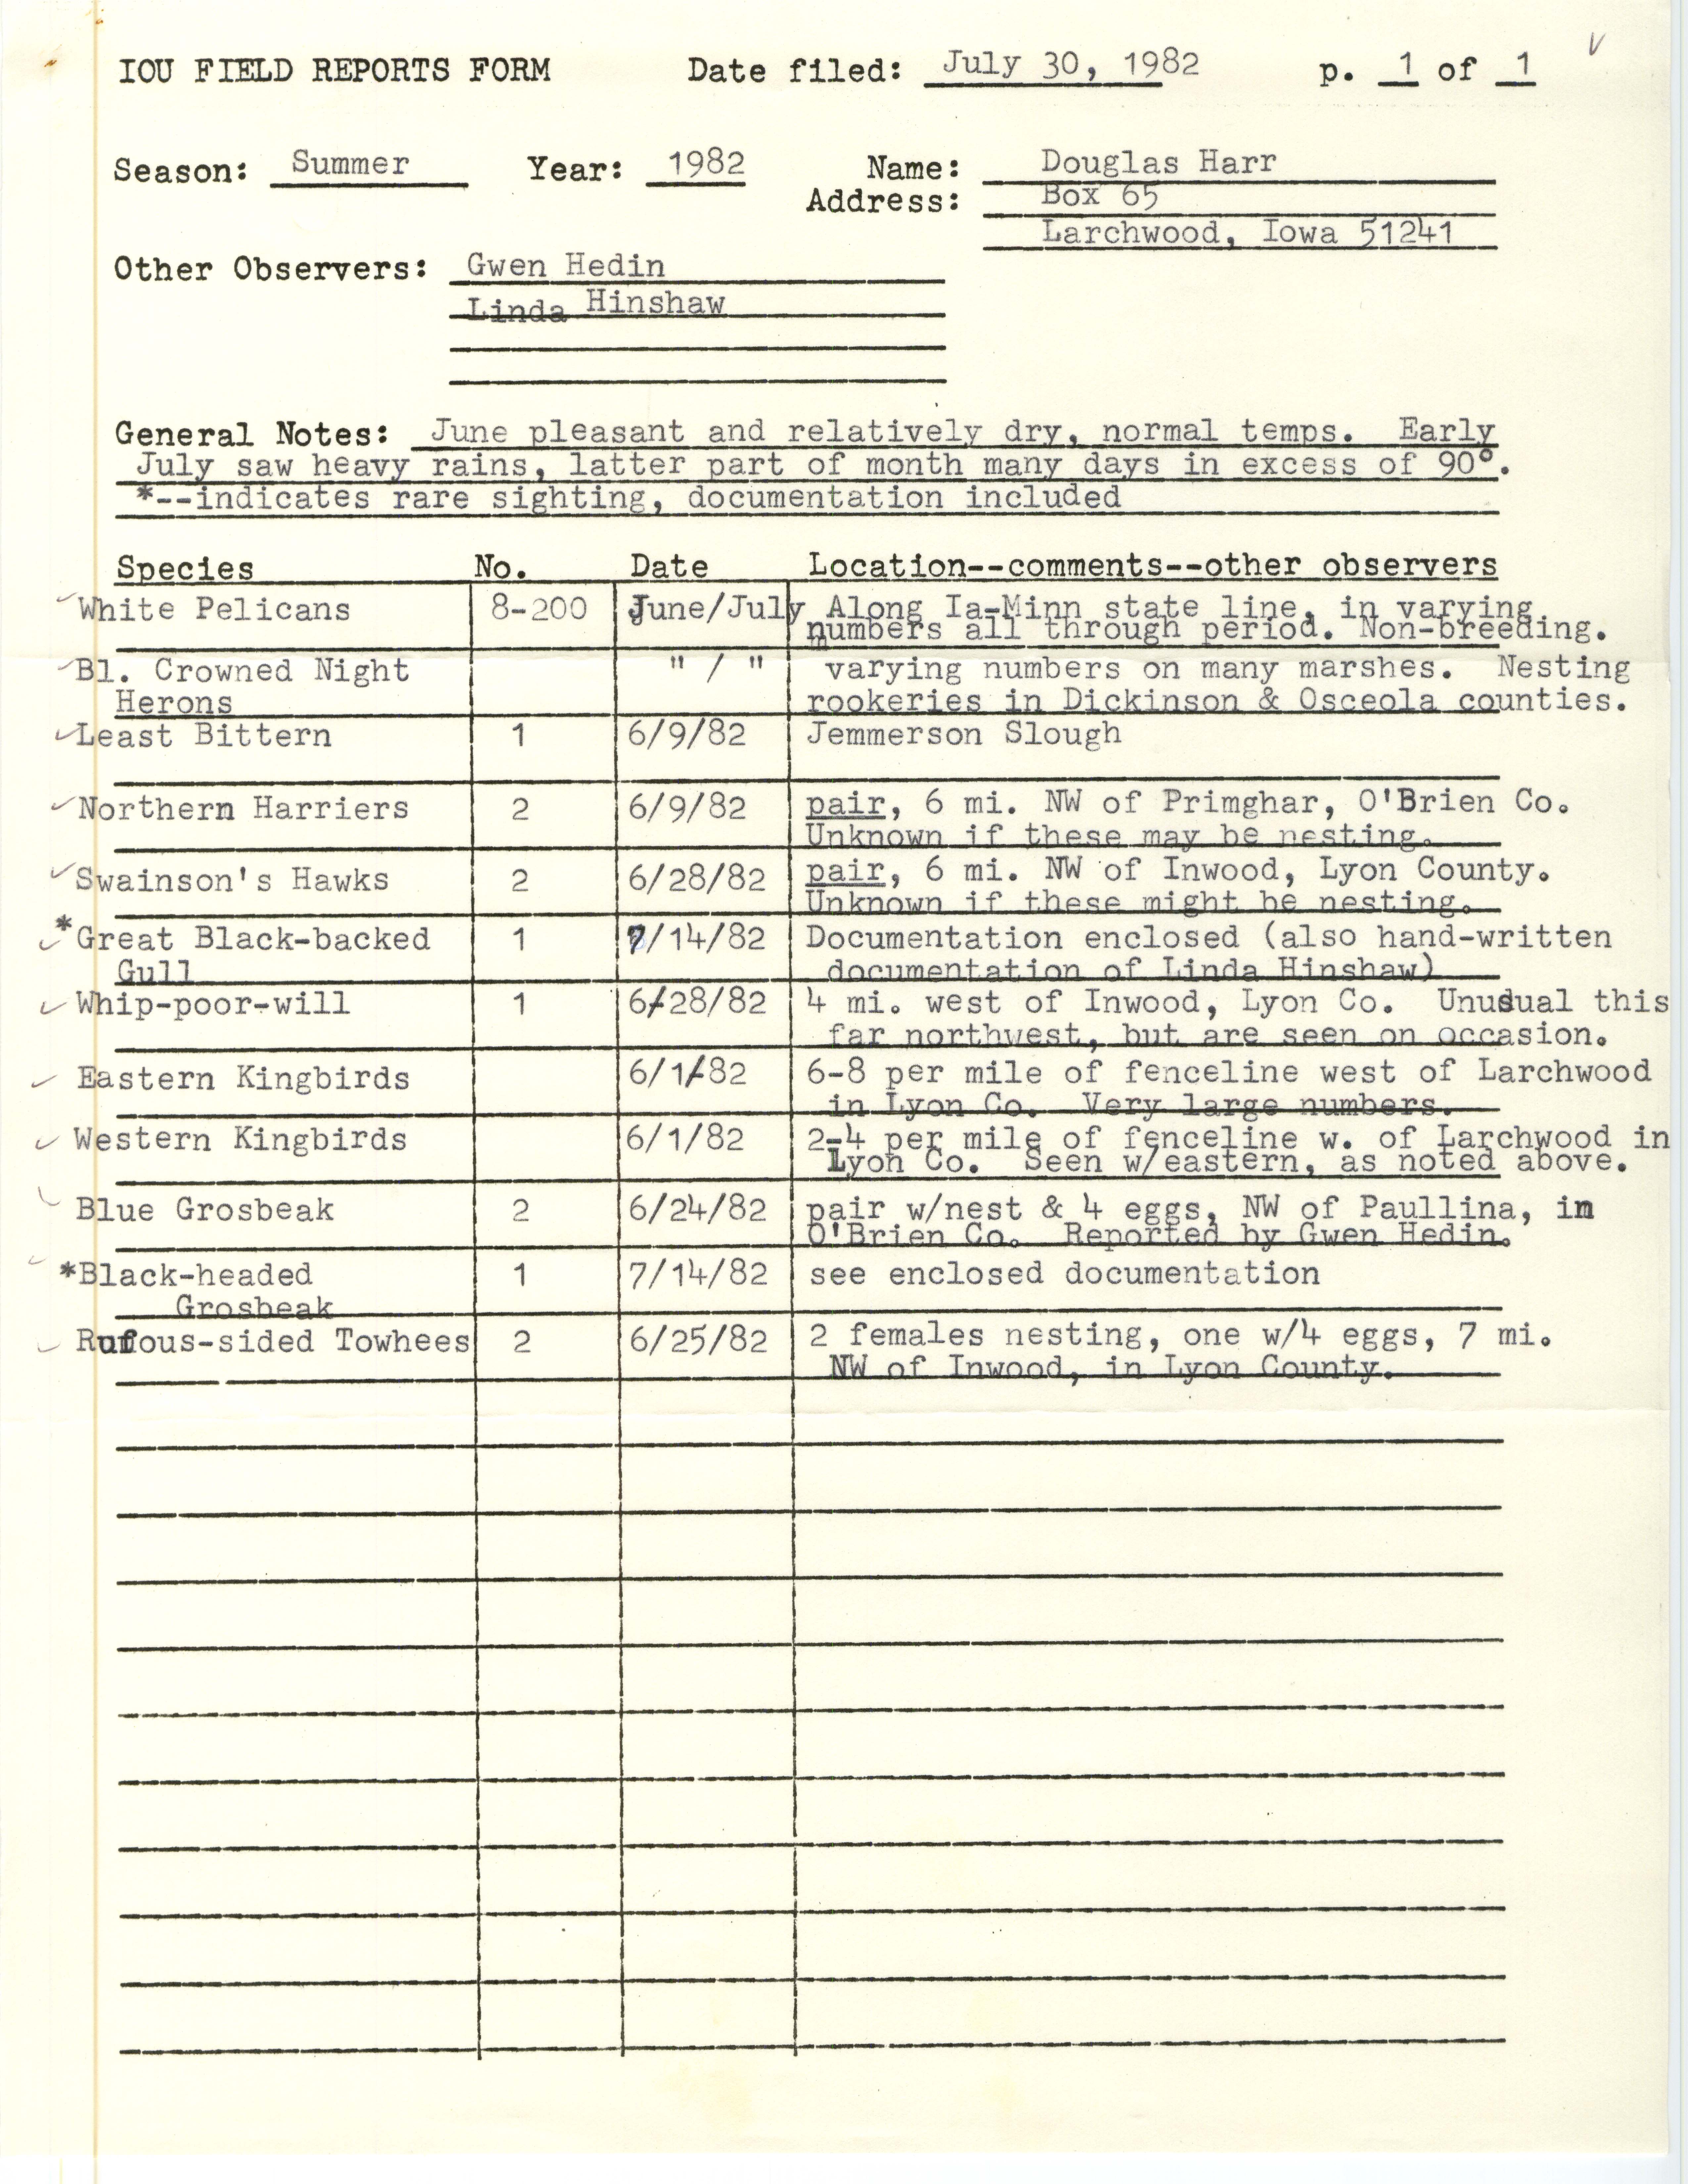 Field report contributed by Douglas C. Harr, July 30, 1982